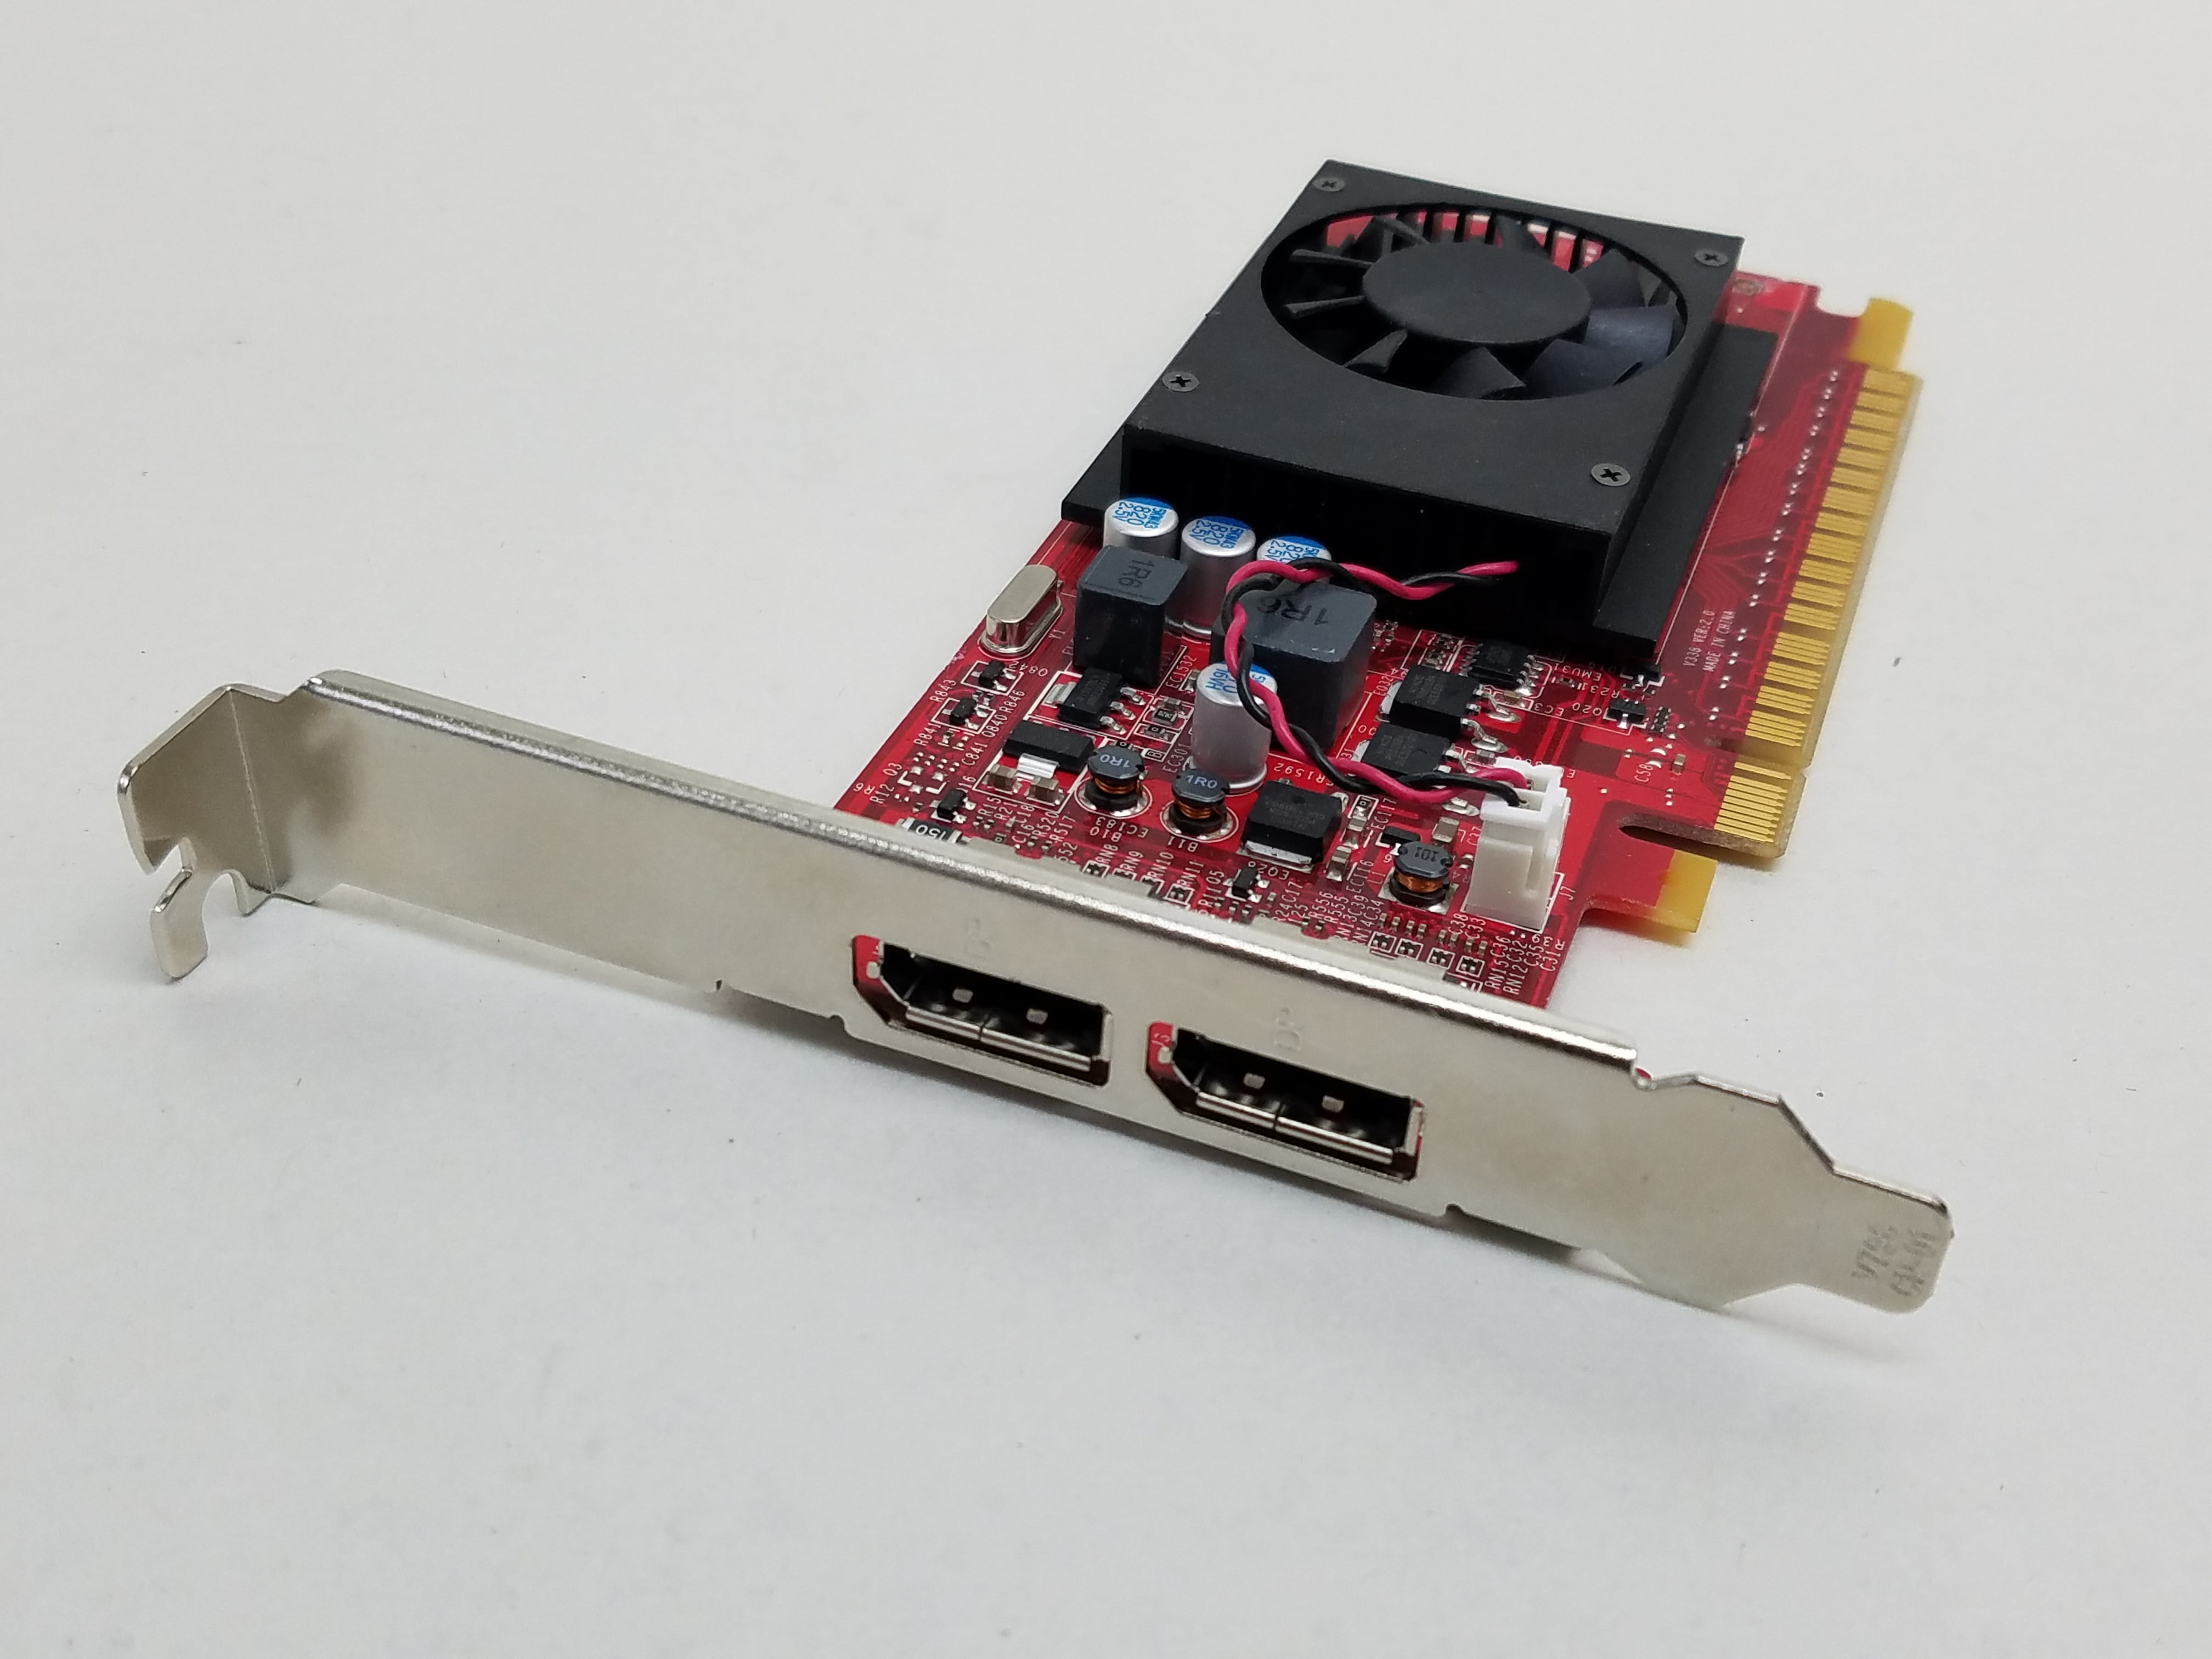 WTS: Nvidia GT 720 2gb video cards low profile pull from Lenovo m900 sff